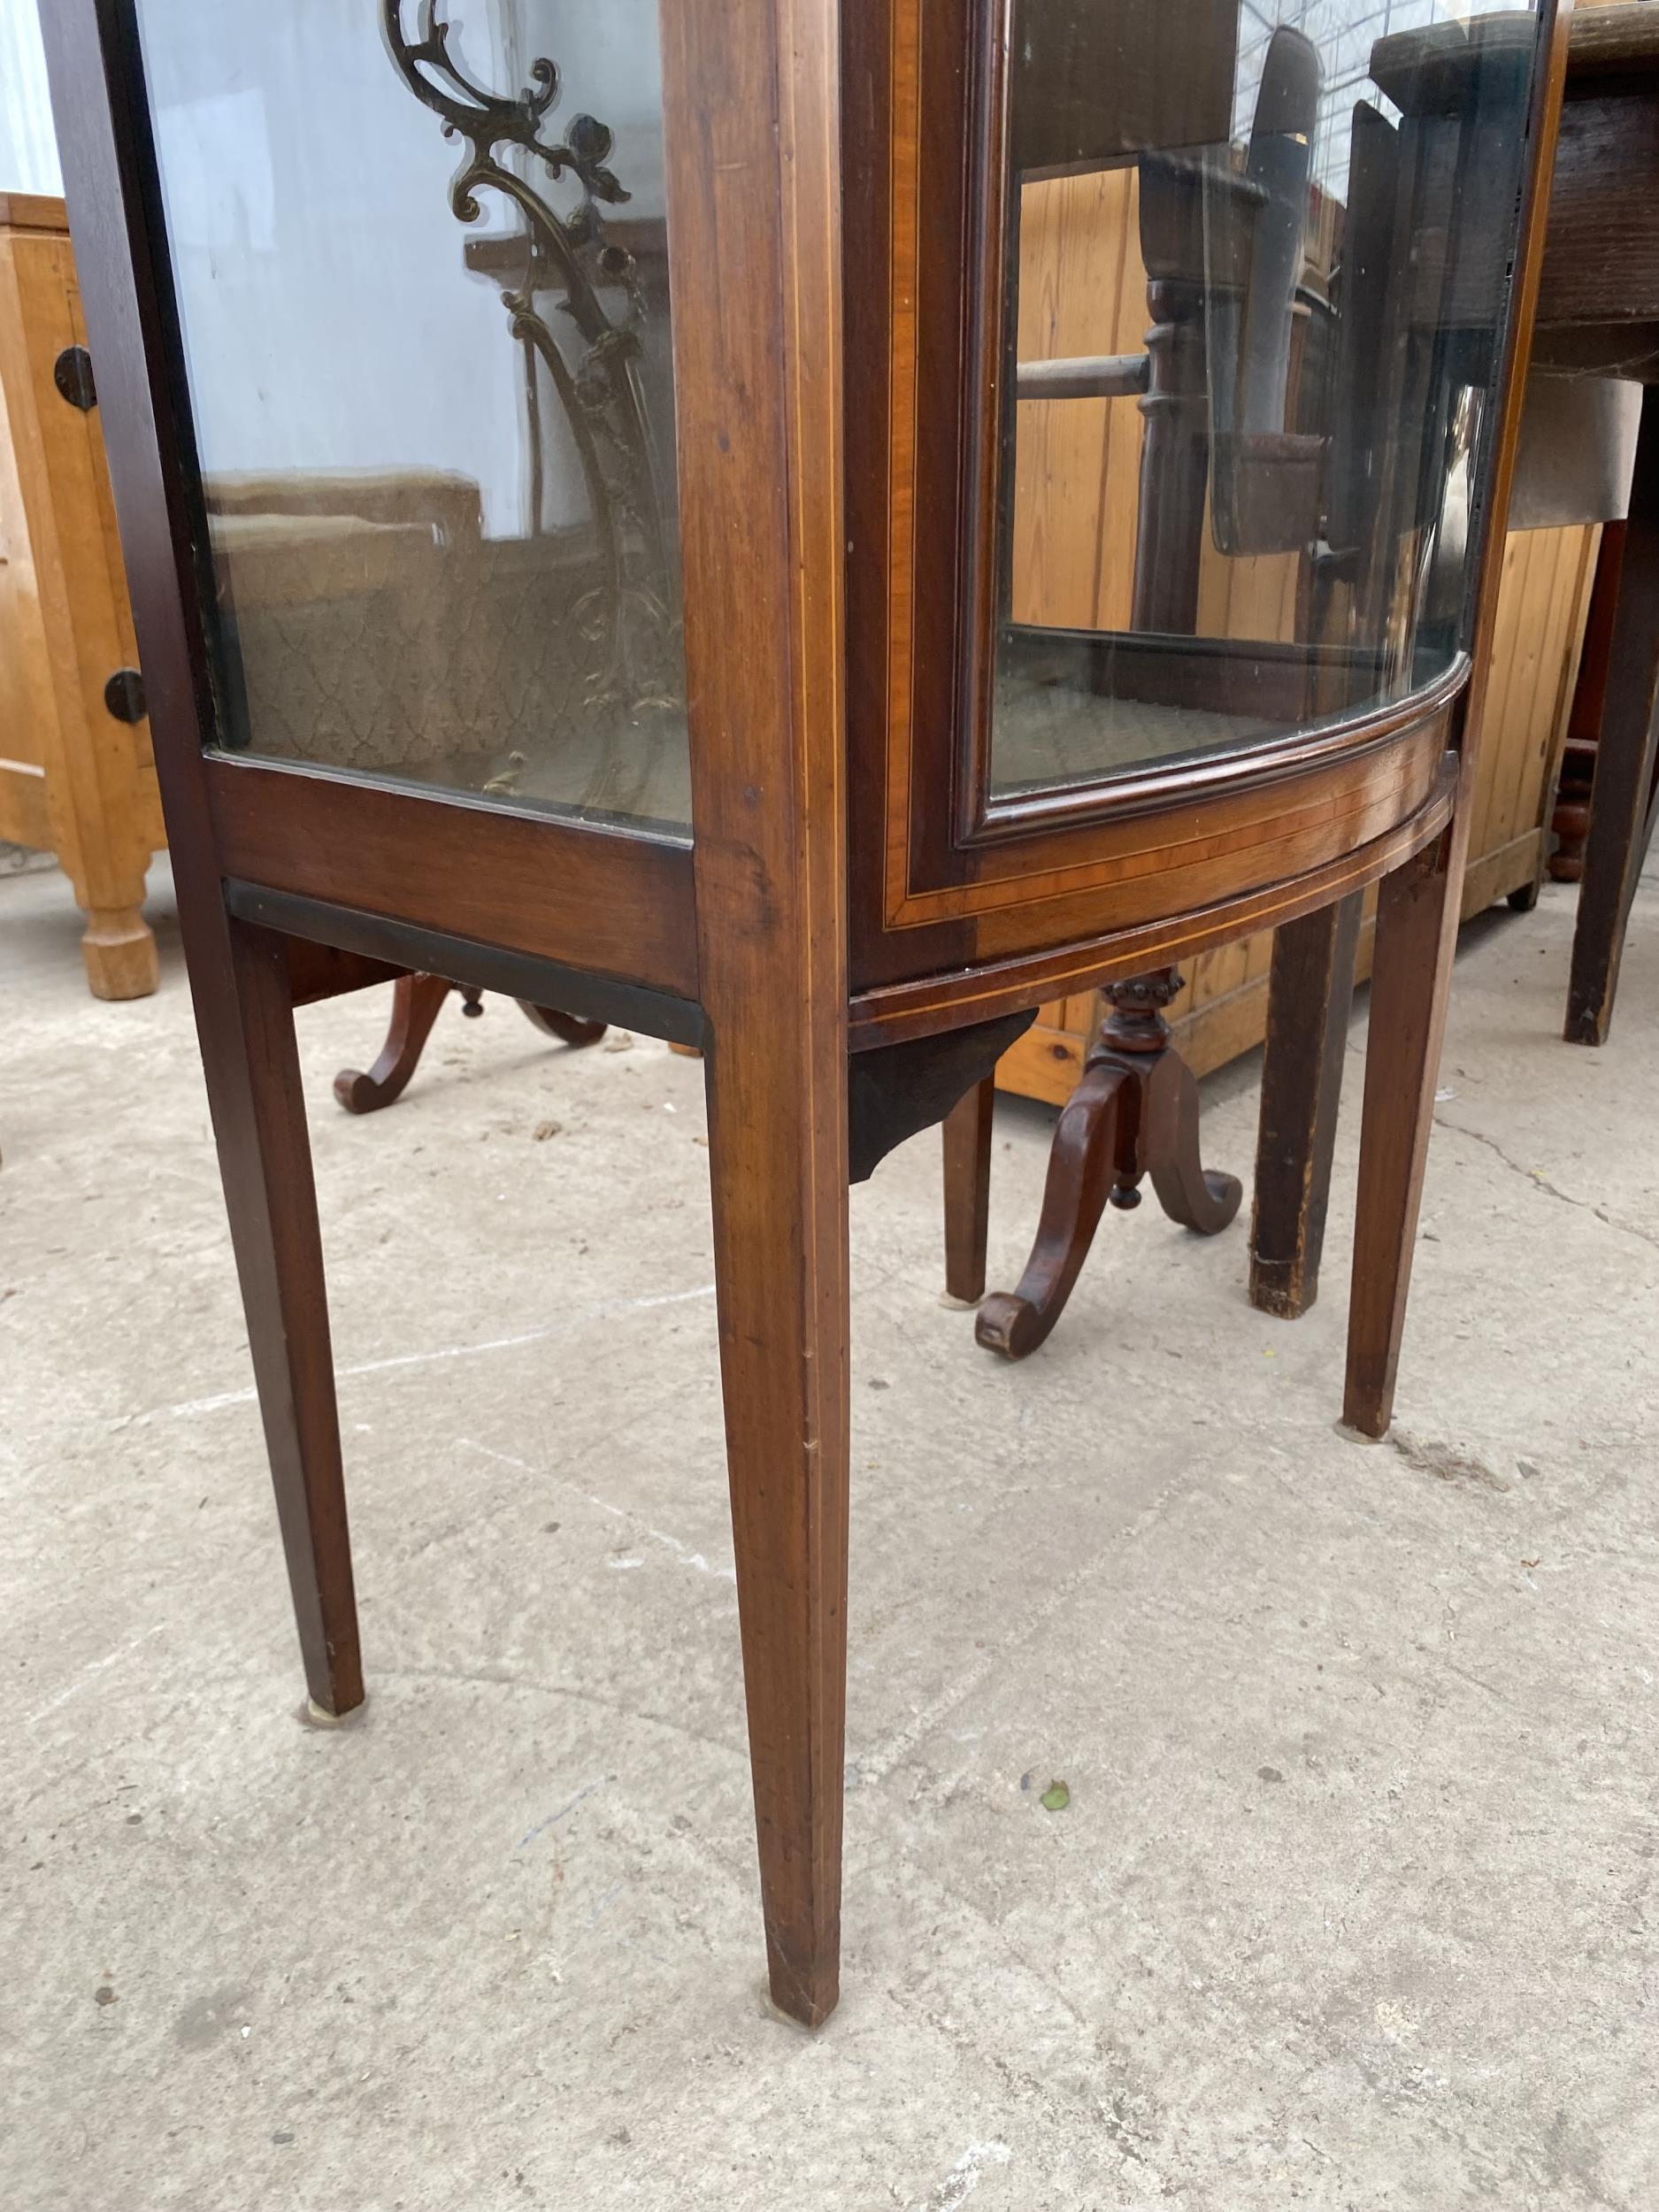 AN EDWARDIAN MAHOGANY AND INLAID BOWFRONTED DISPLAY CABINET, 23" WIDE - Image 4 of 7